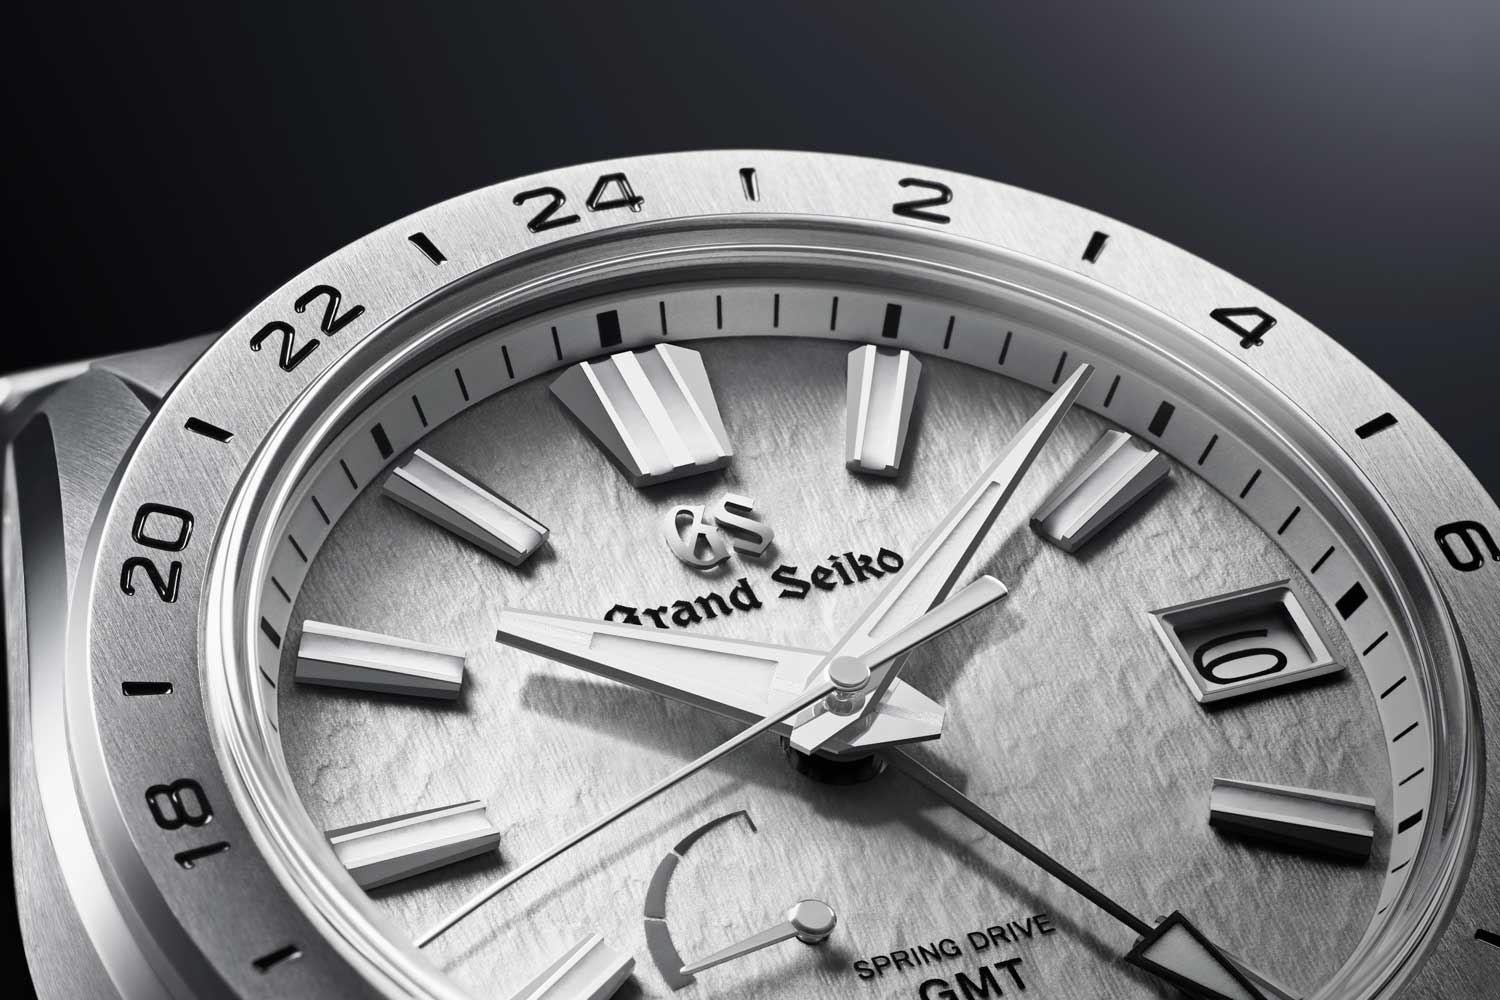 The fine dial details are inspired by the early morning mist in Shinshu